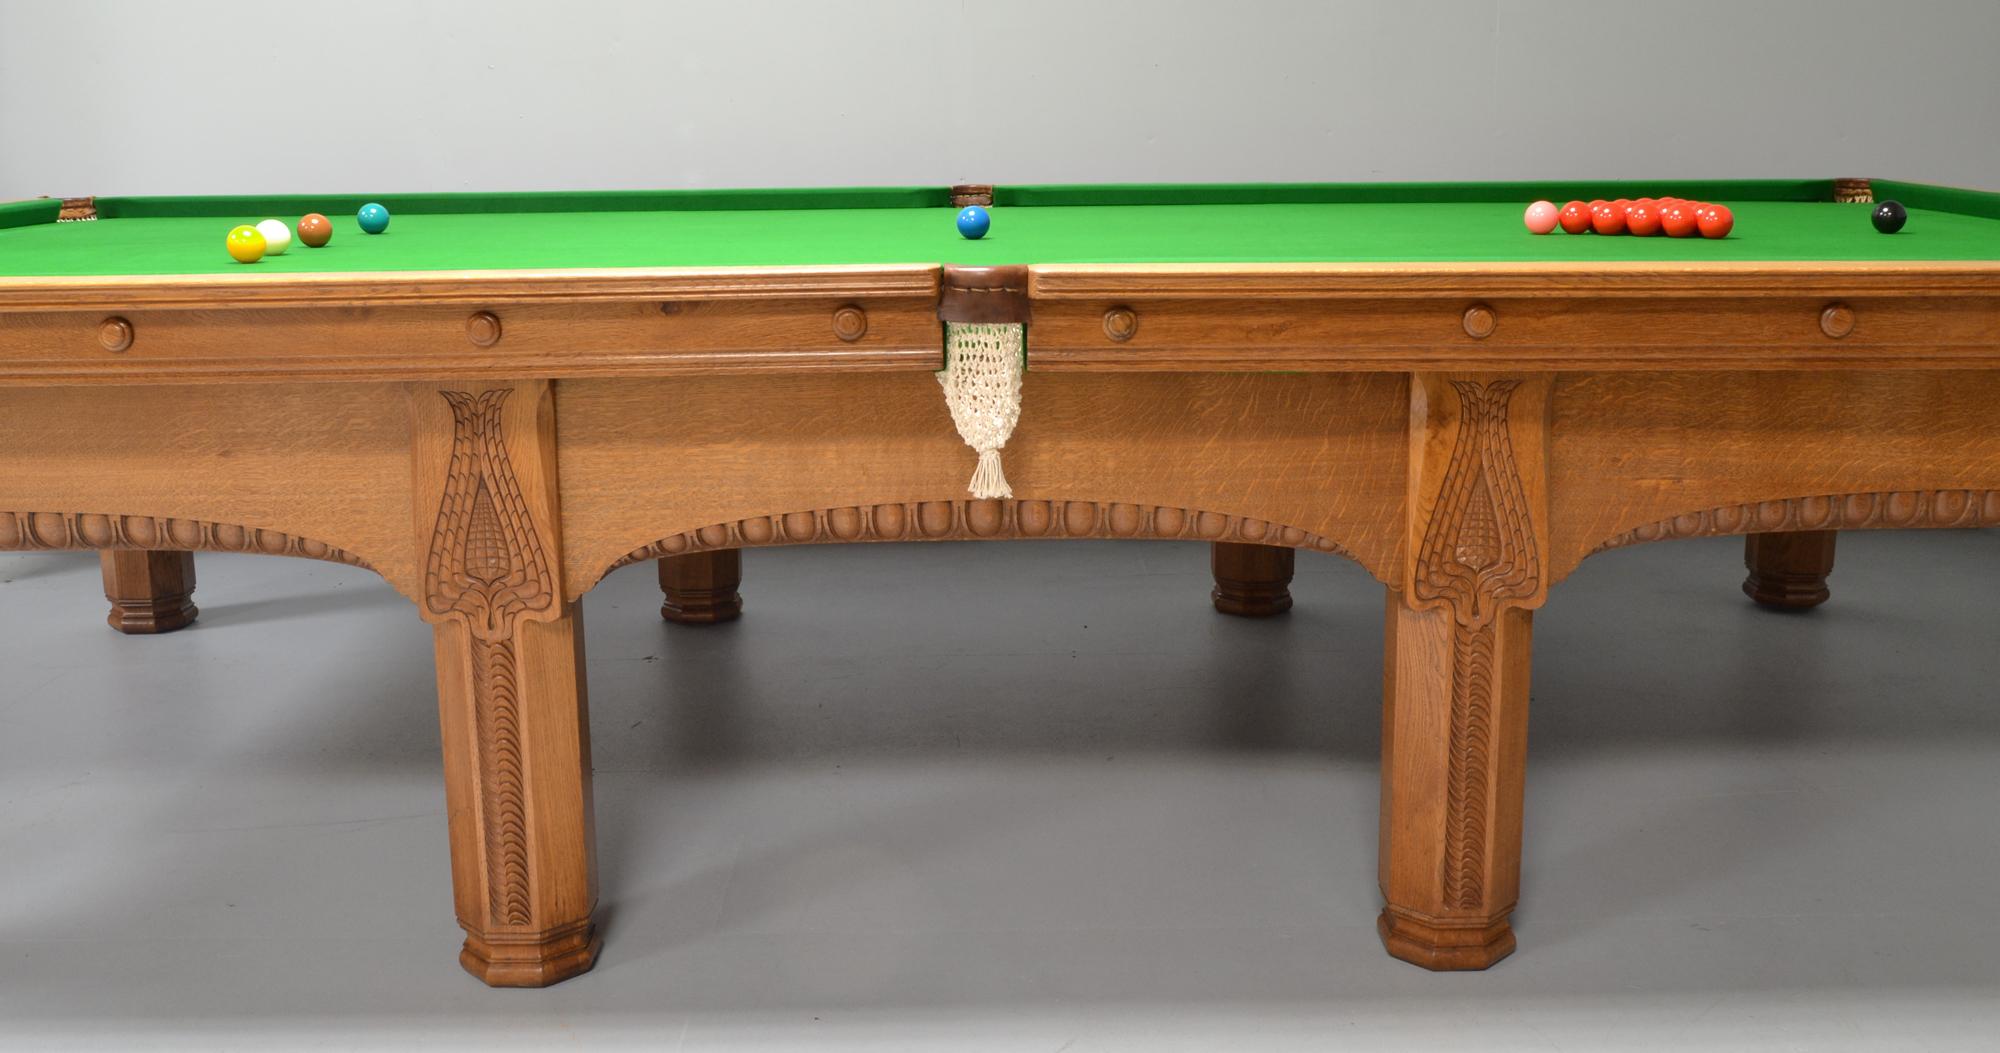 A beautiful solid oak Art Nouveau snooker or billiard table by Orme and Son circa 1901.

Standing on eight octagonal legs with superb geometric designs this table has great presence.

The timber quality throughout is the finest quarter sawn oak,